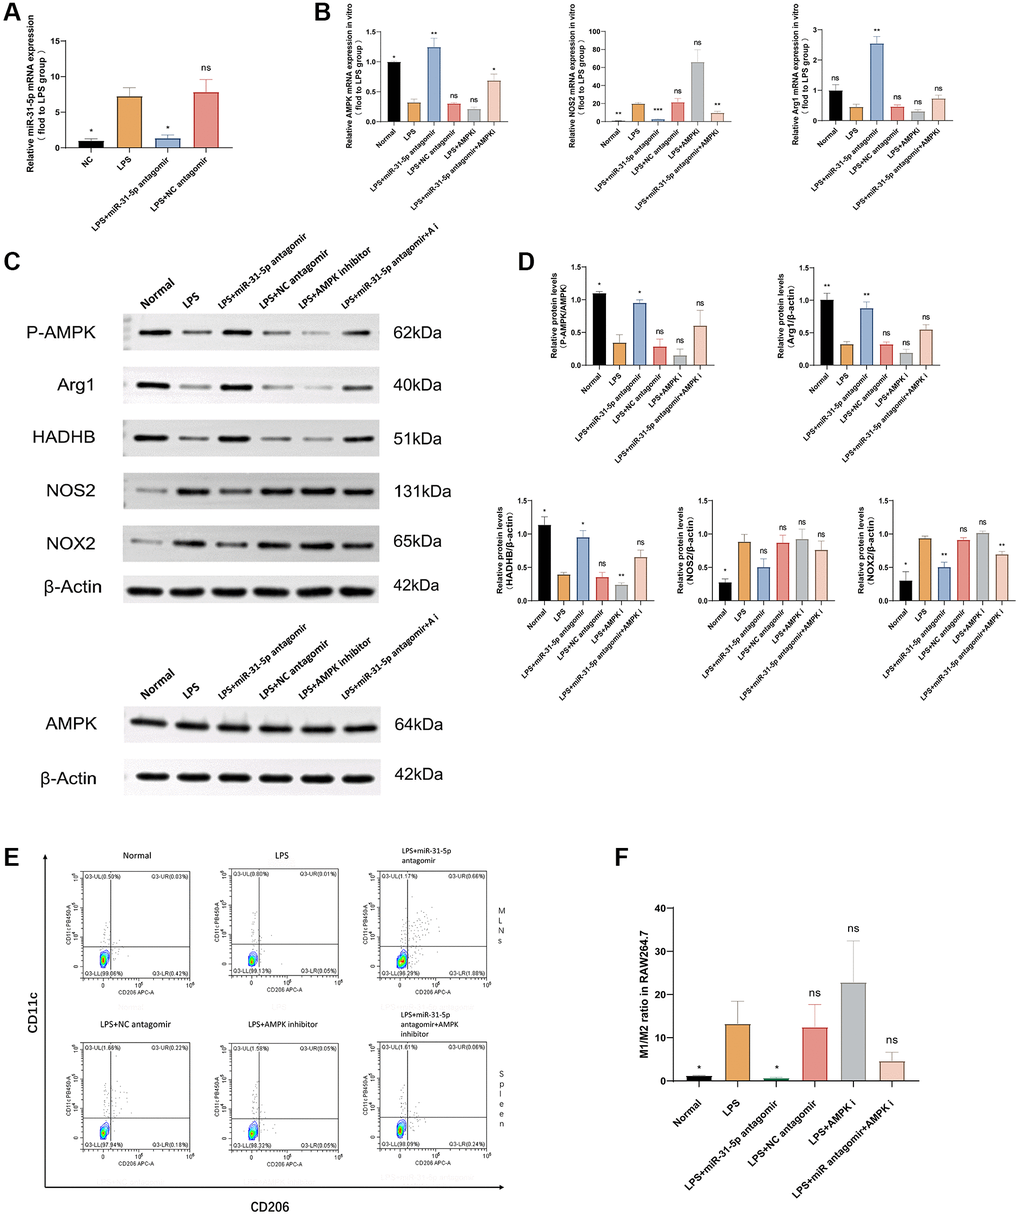 miR-31-5p antagomir may transform macrophages from M1 type to M2 type through the AMPK-related pathway. (A) miR-31-5p antagomir was successfully transfected into RAW264.7 cells. (B) qPCR detection of AMPK, NOS2, and Arg1 mRNAs. (C) Western blotting strips of P-AMPK/AMPK, NOS2, Arg1, NOX2, HADHB (β-actin). (D) Protein quantitative analysis of P-AMPK/AMPK, NOS2, Arg1, NOX2 and HADHB (β-actin). (E) Flow cytometry of M1/M2. (F) Statistical analysis of M1/M2 cell ratio. Each bar represents mean ± SD, n = 8 from each group. Ns represented P > 0.05, *P **P ***P ****P 